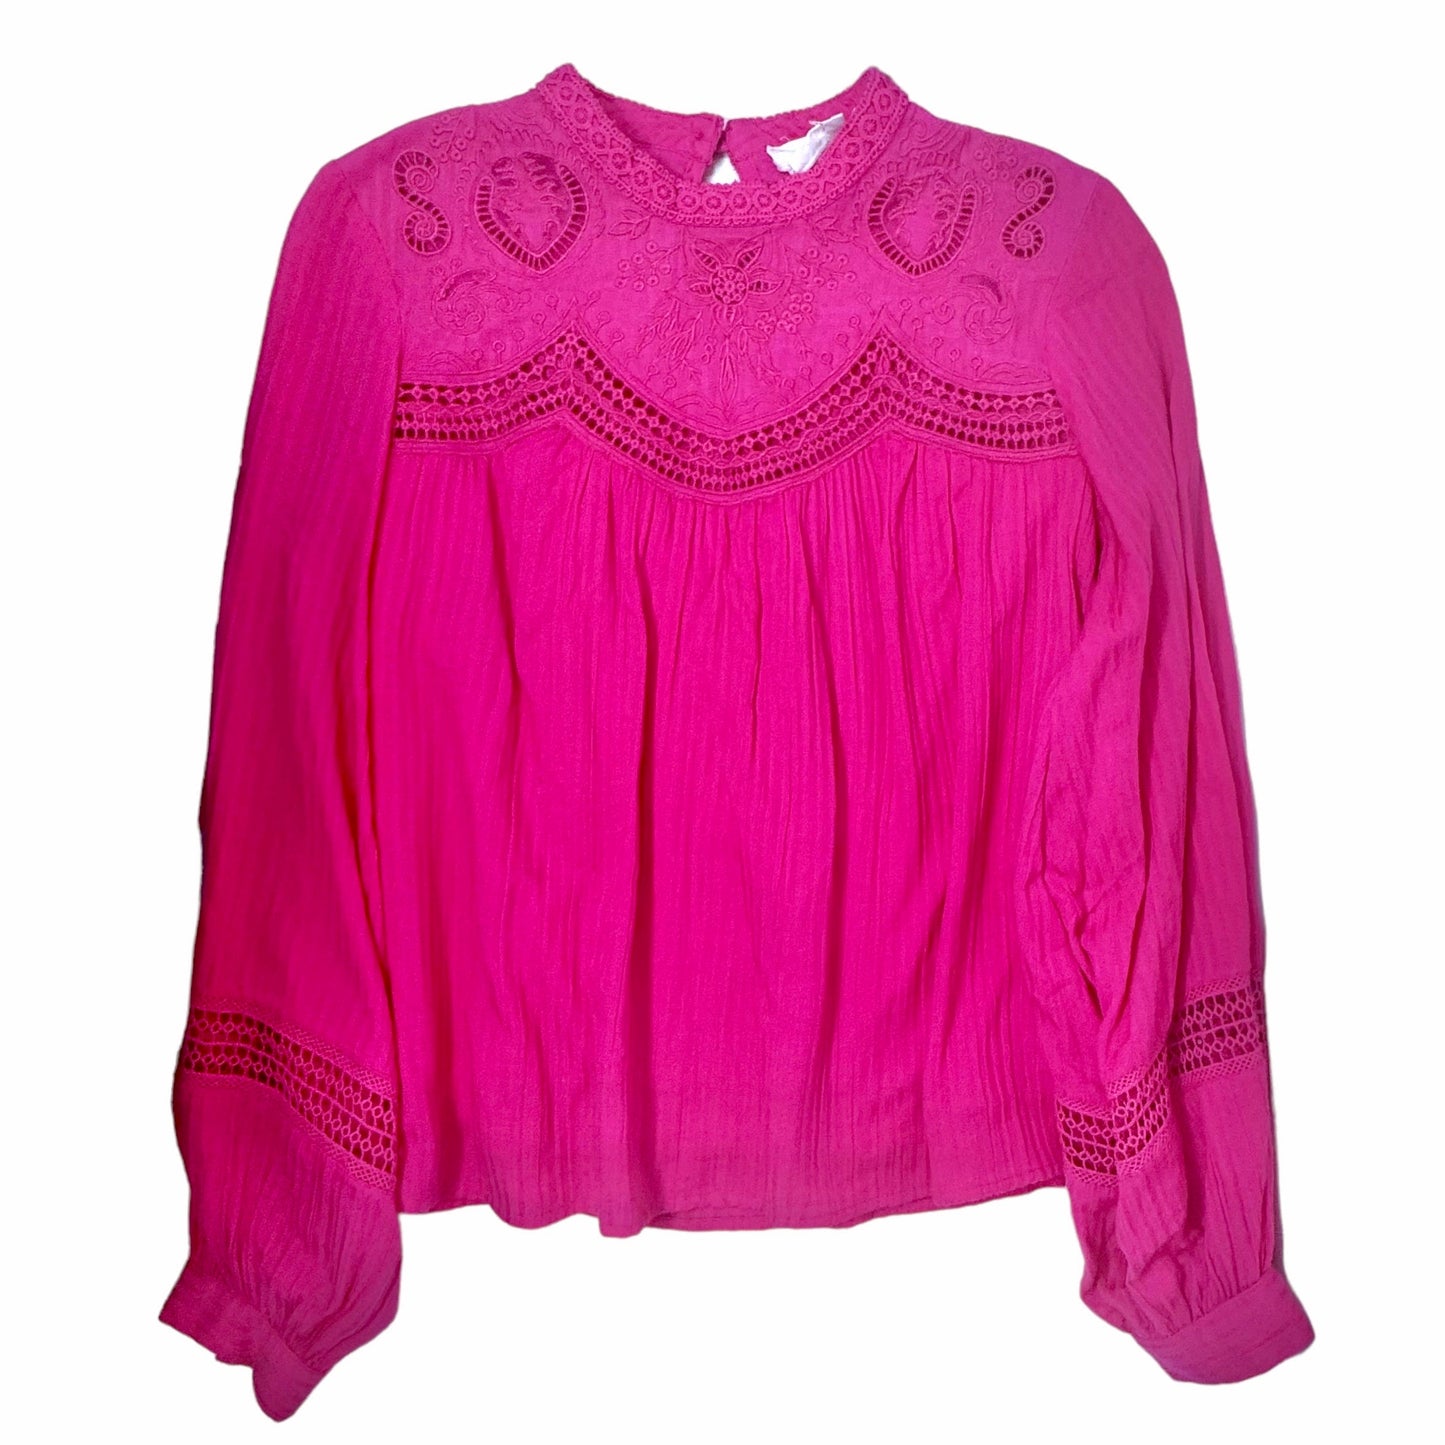 Harmony Lace  Blouse - Bright Pink By Anthropologie  Size: S